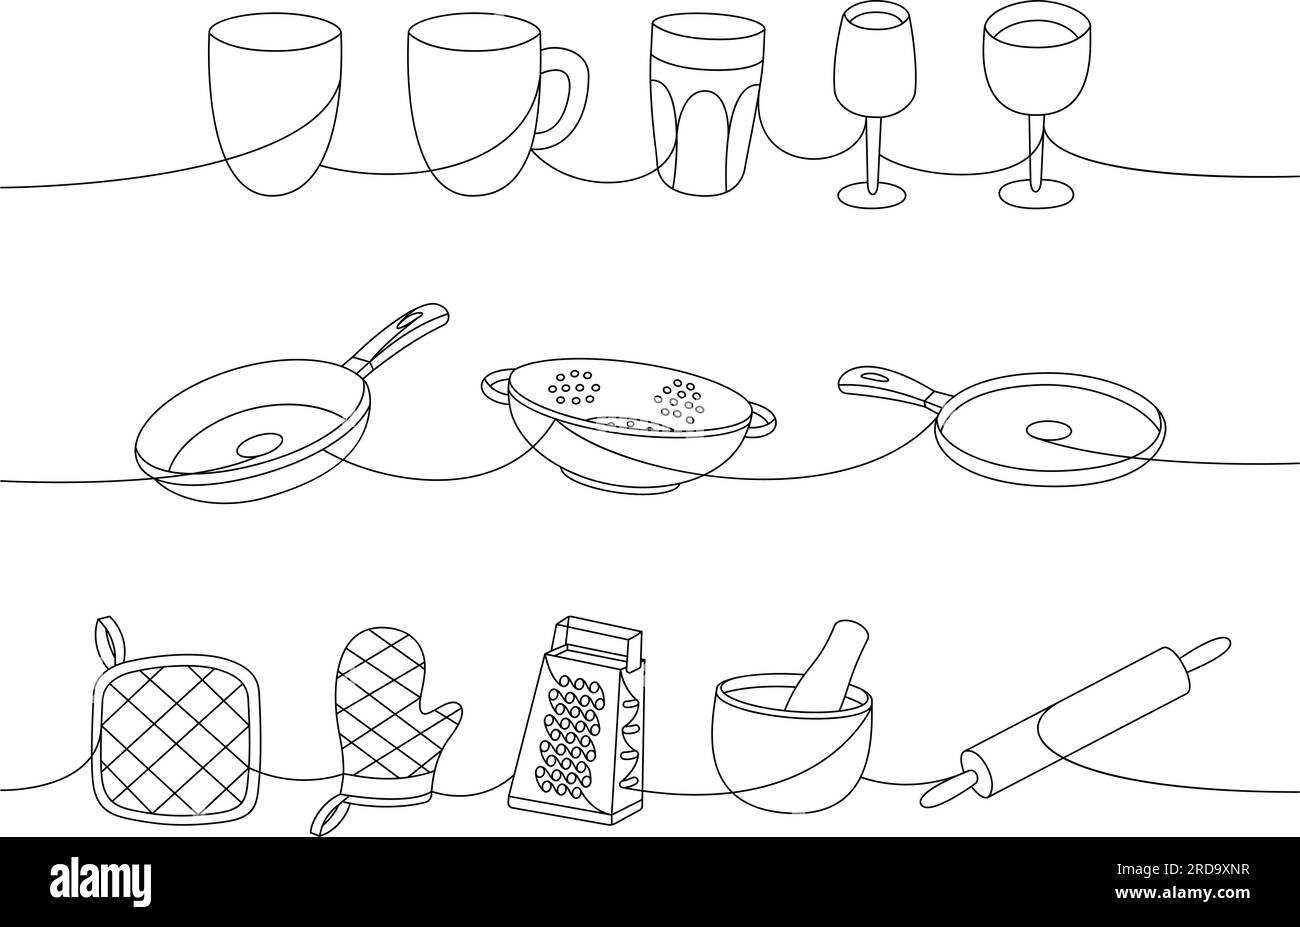 How To Draw Cooking Utensils || Kitchen Utensils Drawing Tutorial. - YouTube